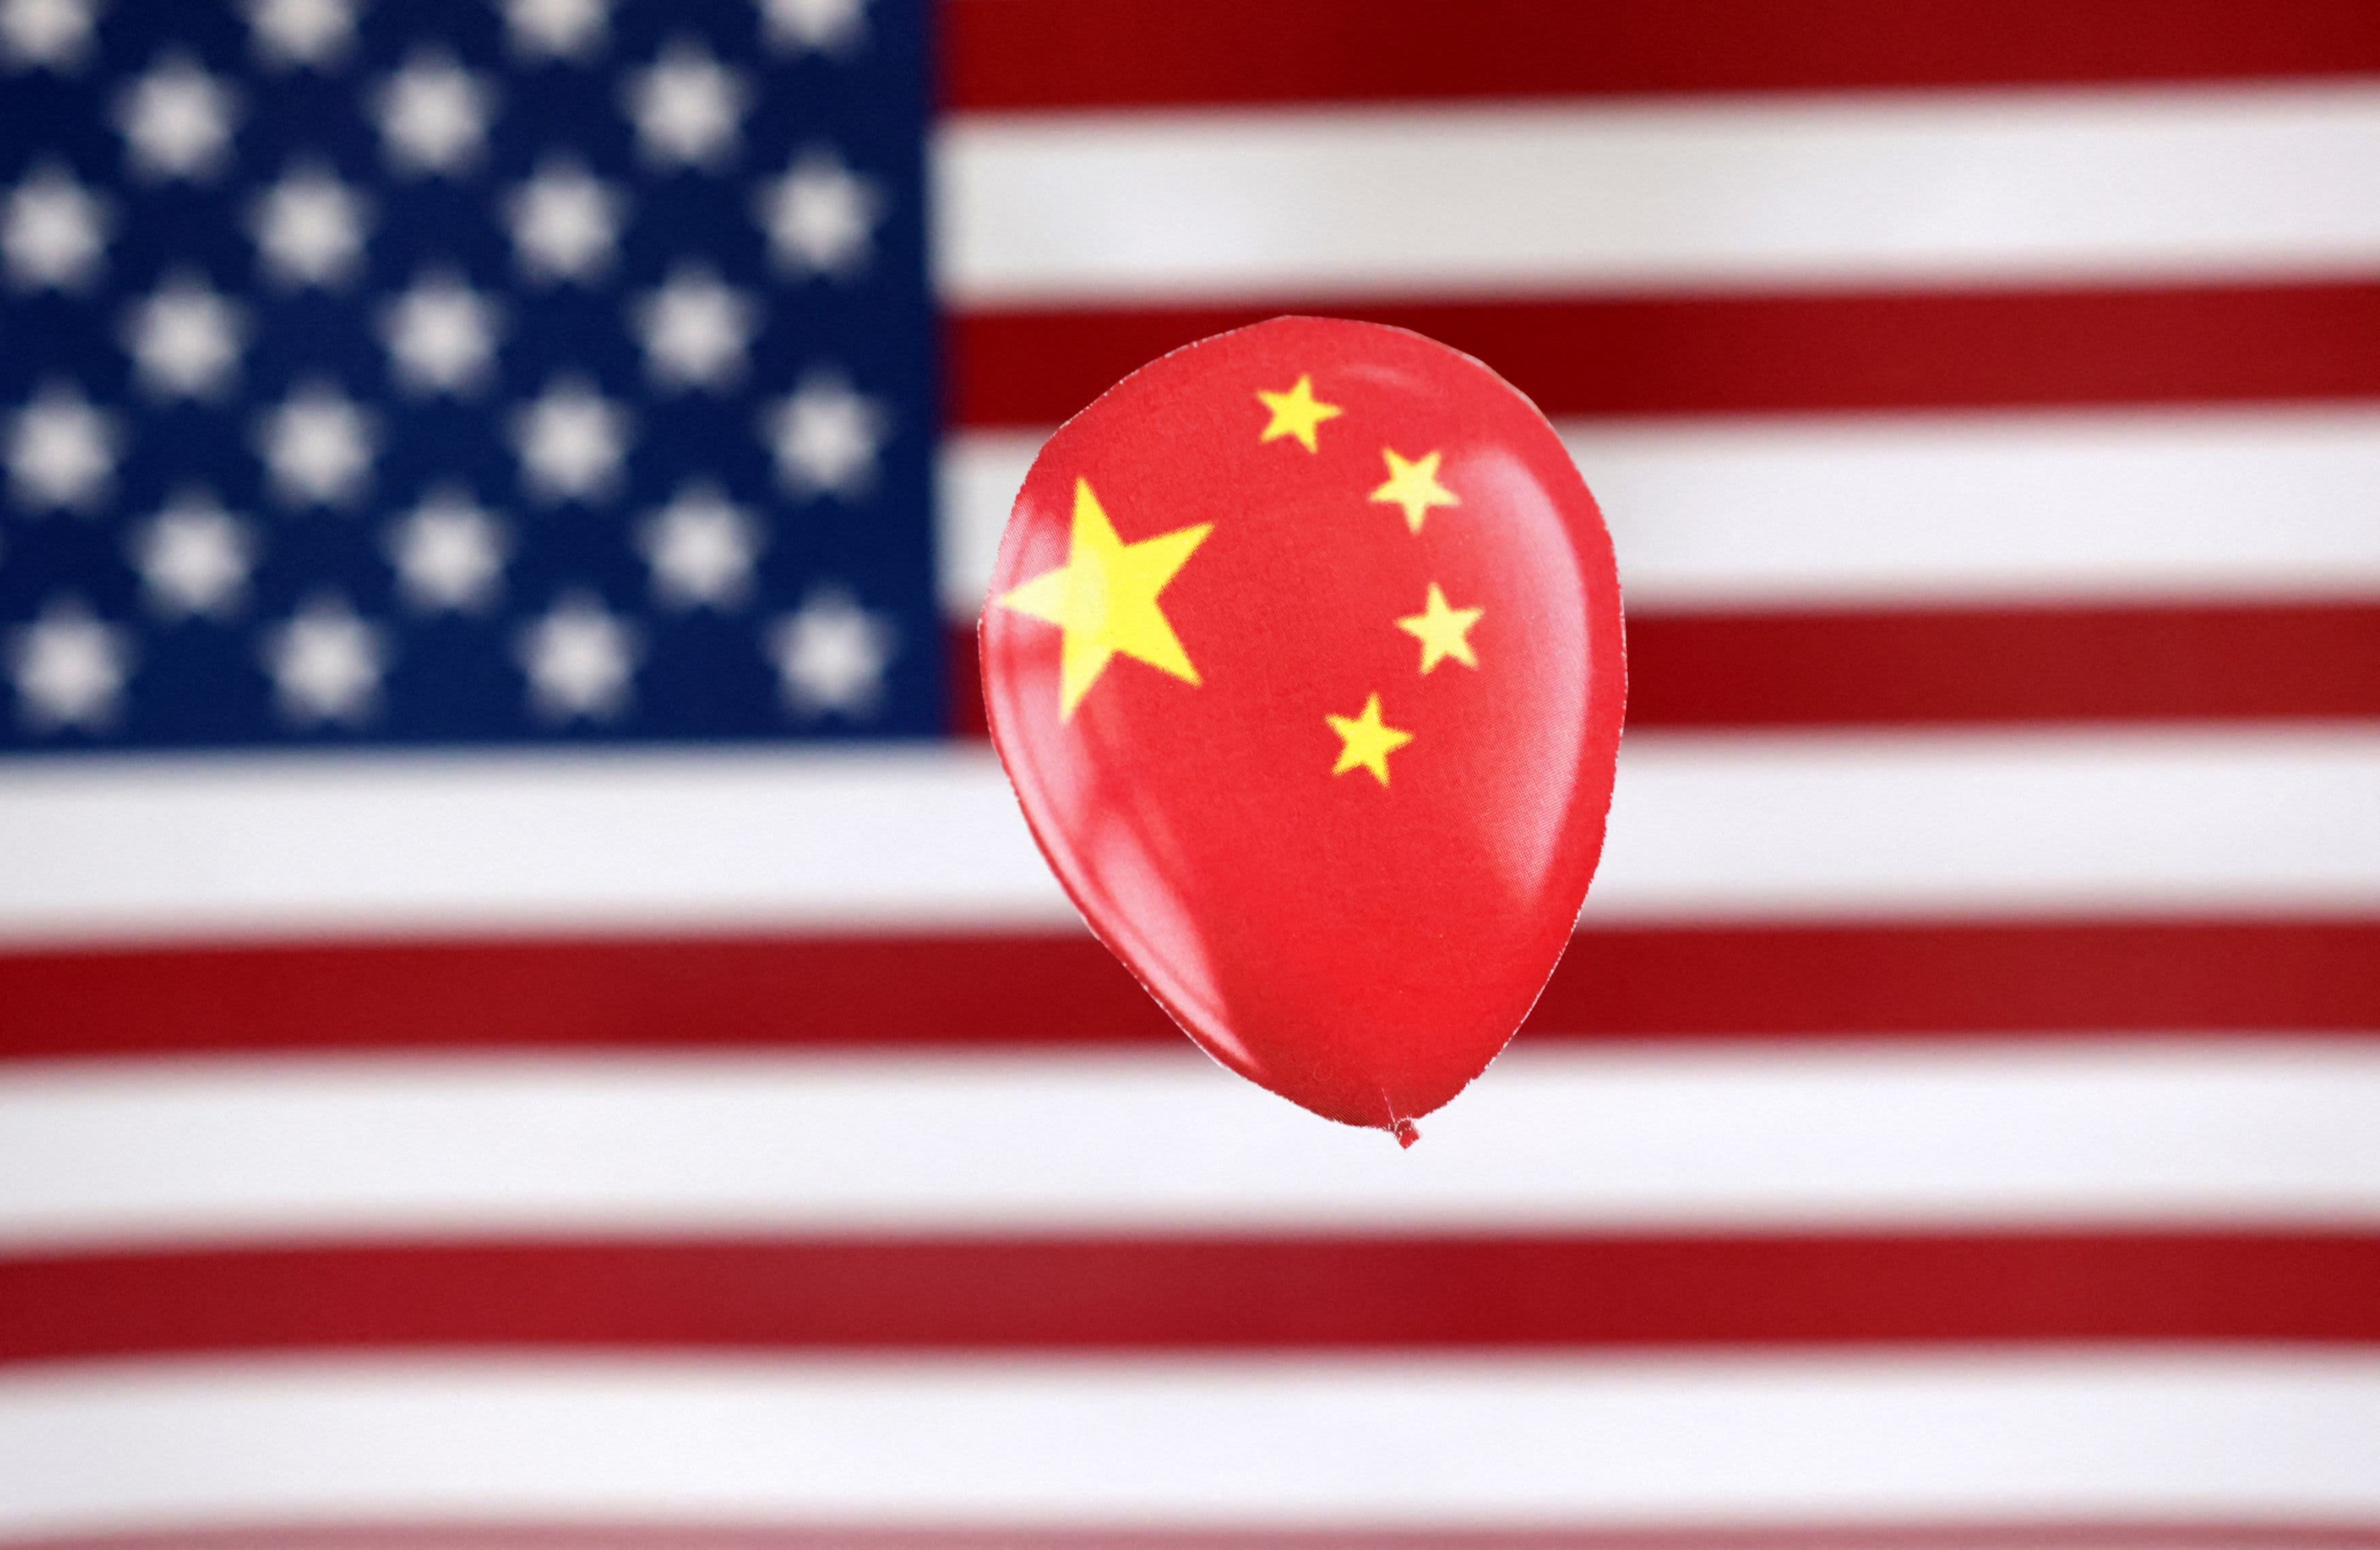 4 stocks to buy if US and China geopolitical concerns continue to rise: UBS